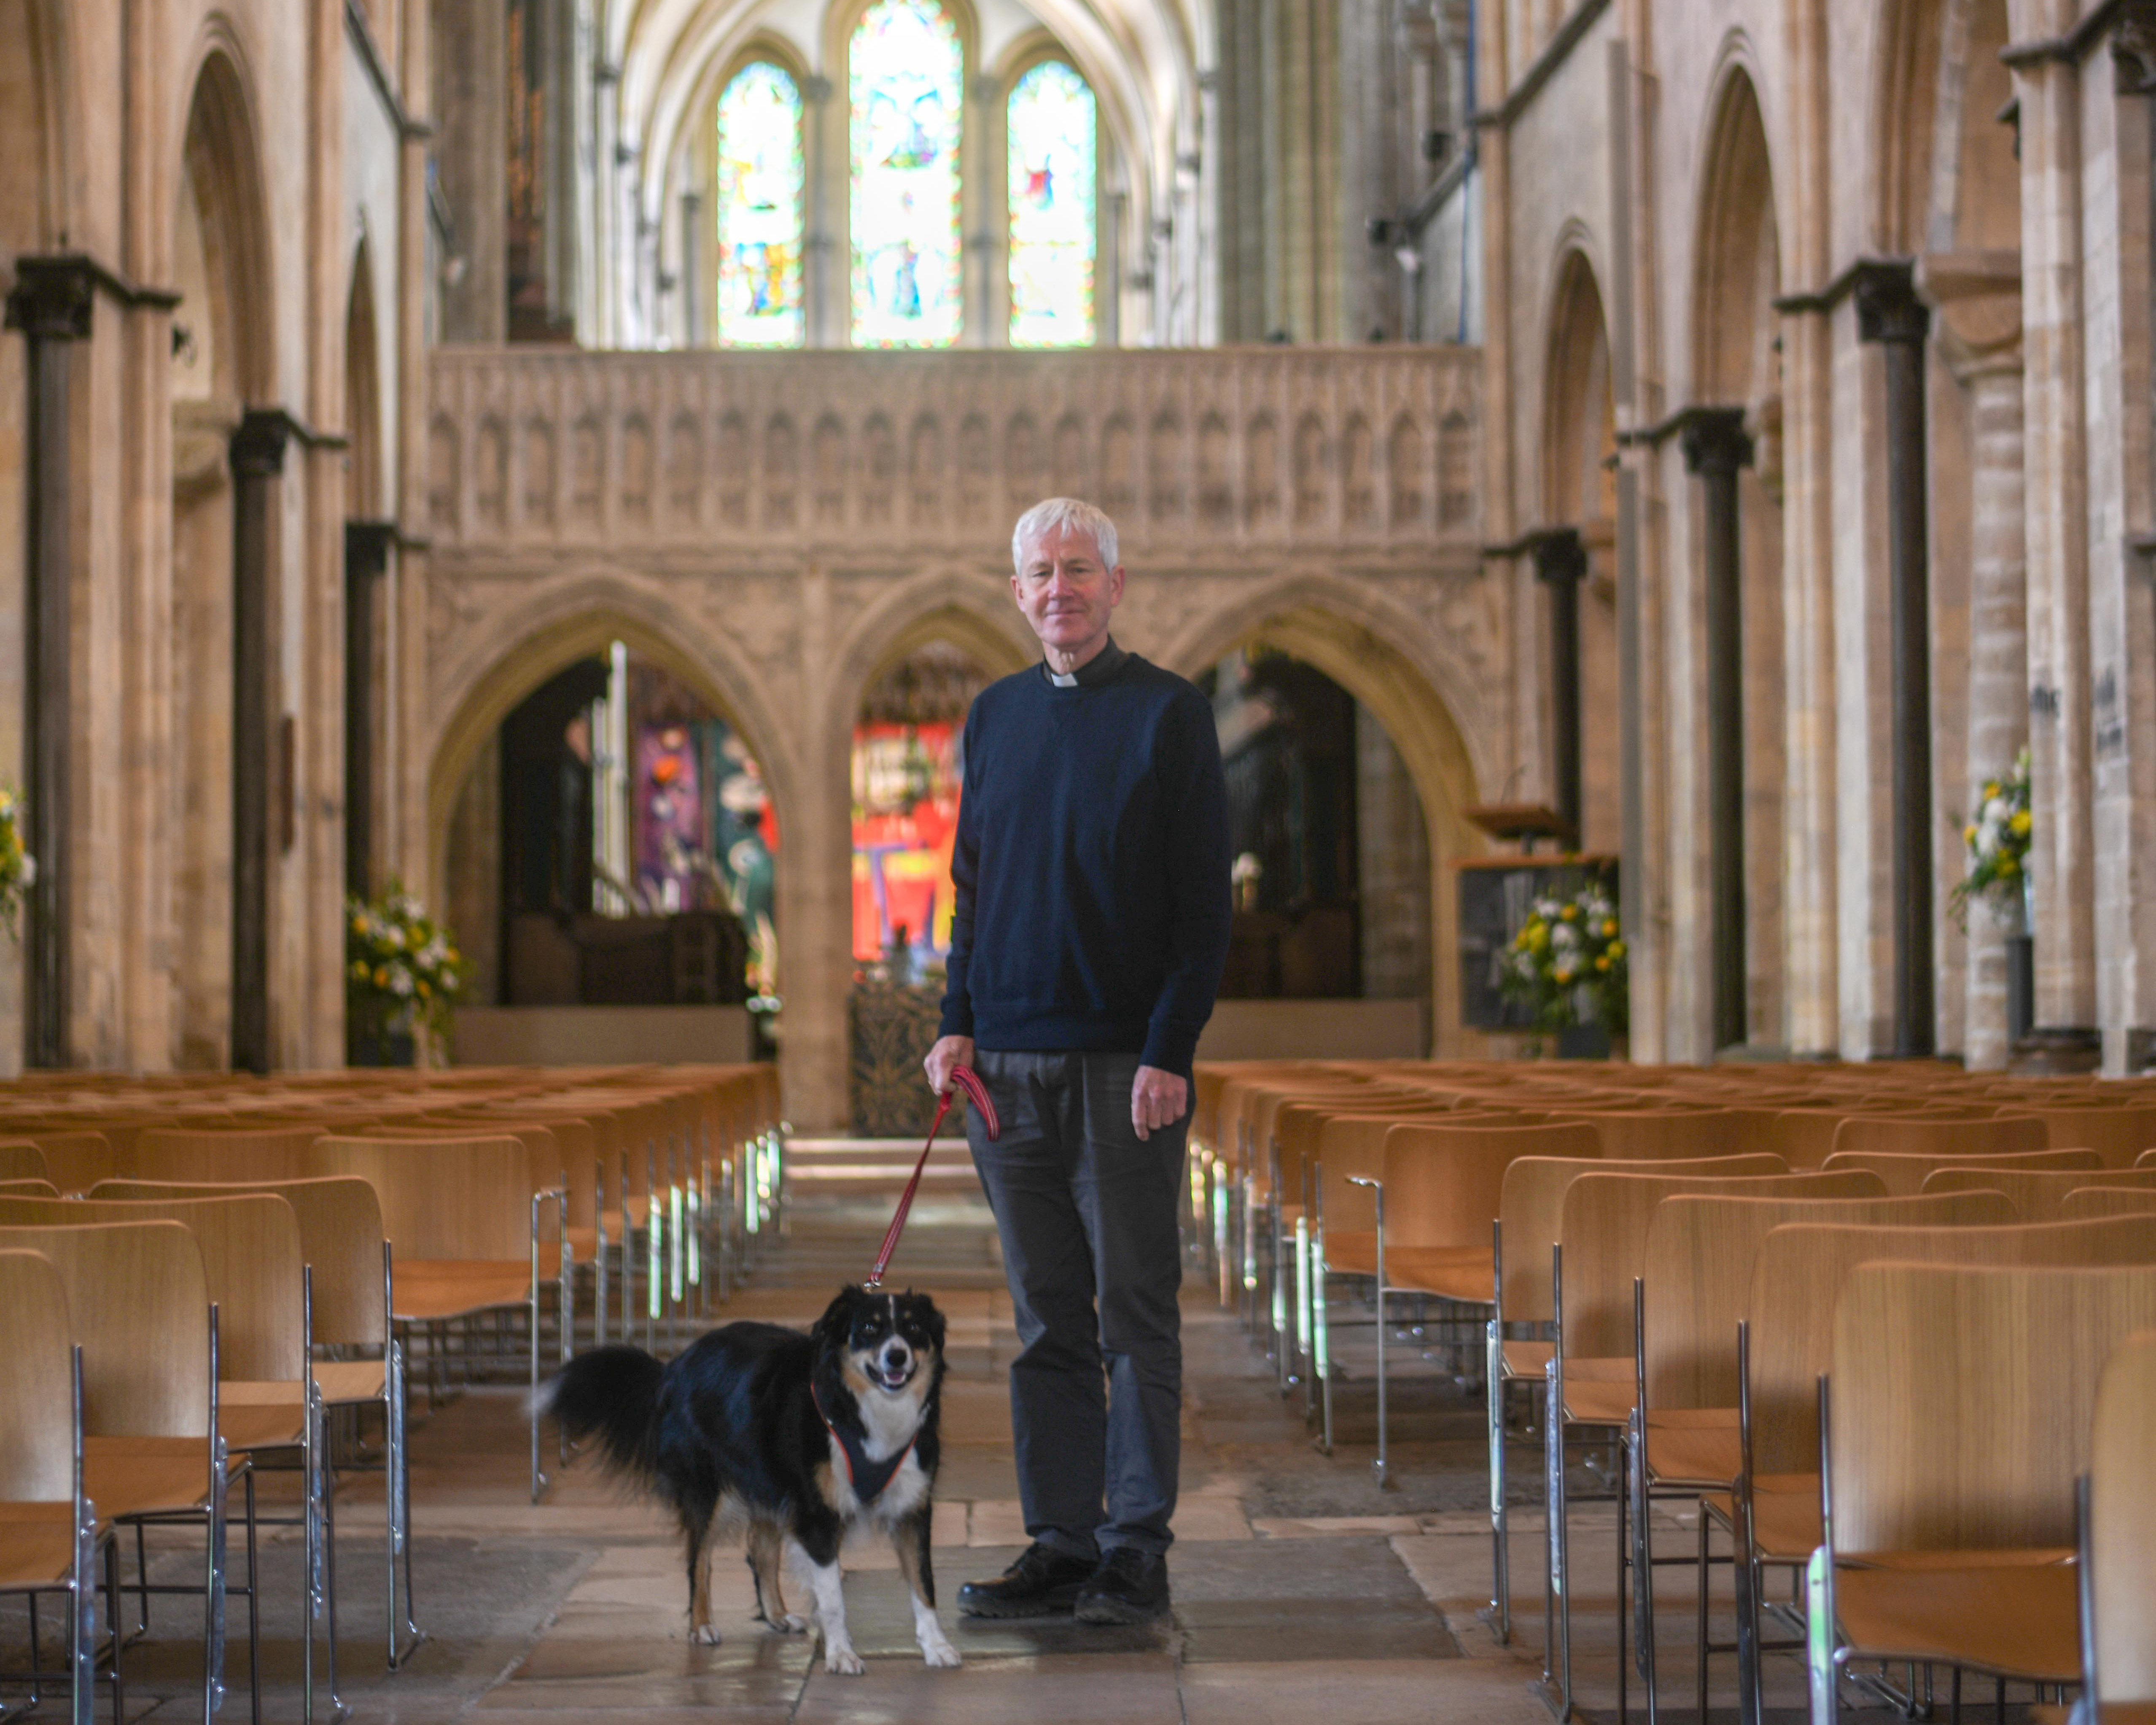 Interim Dean of Chichester, The Reverend Canon Simon Holland stands in the Cathedral Nave with his dog, a brown, black and white English Shephard